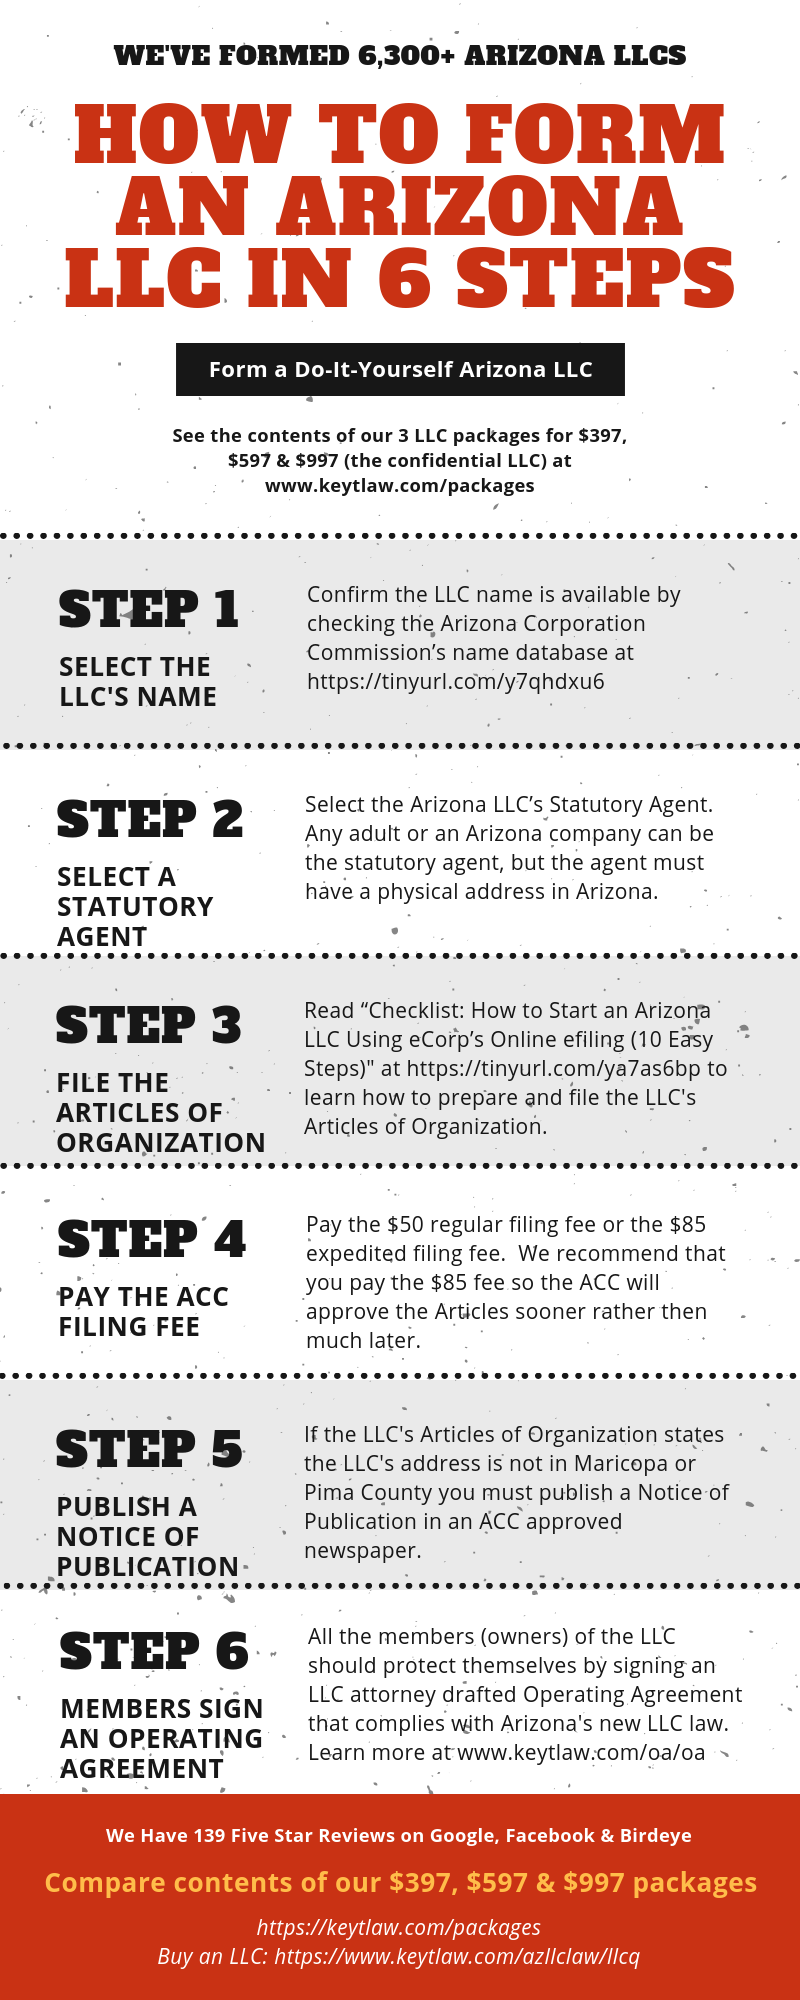 7 Simple Techniques For Setting Up An Llc In Florida